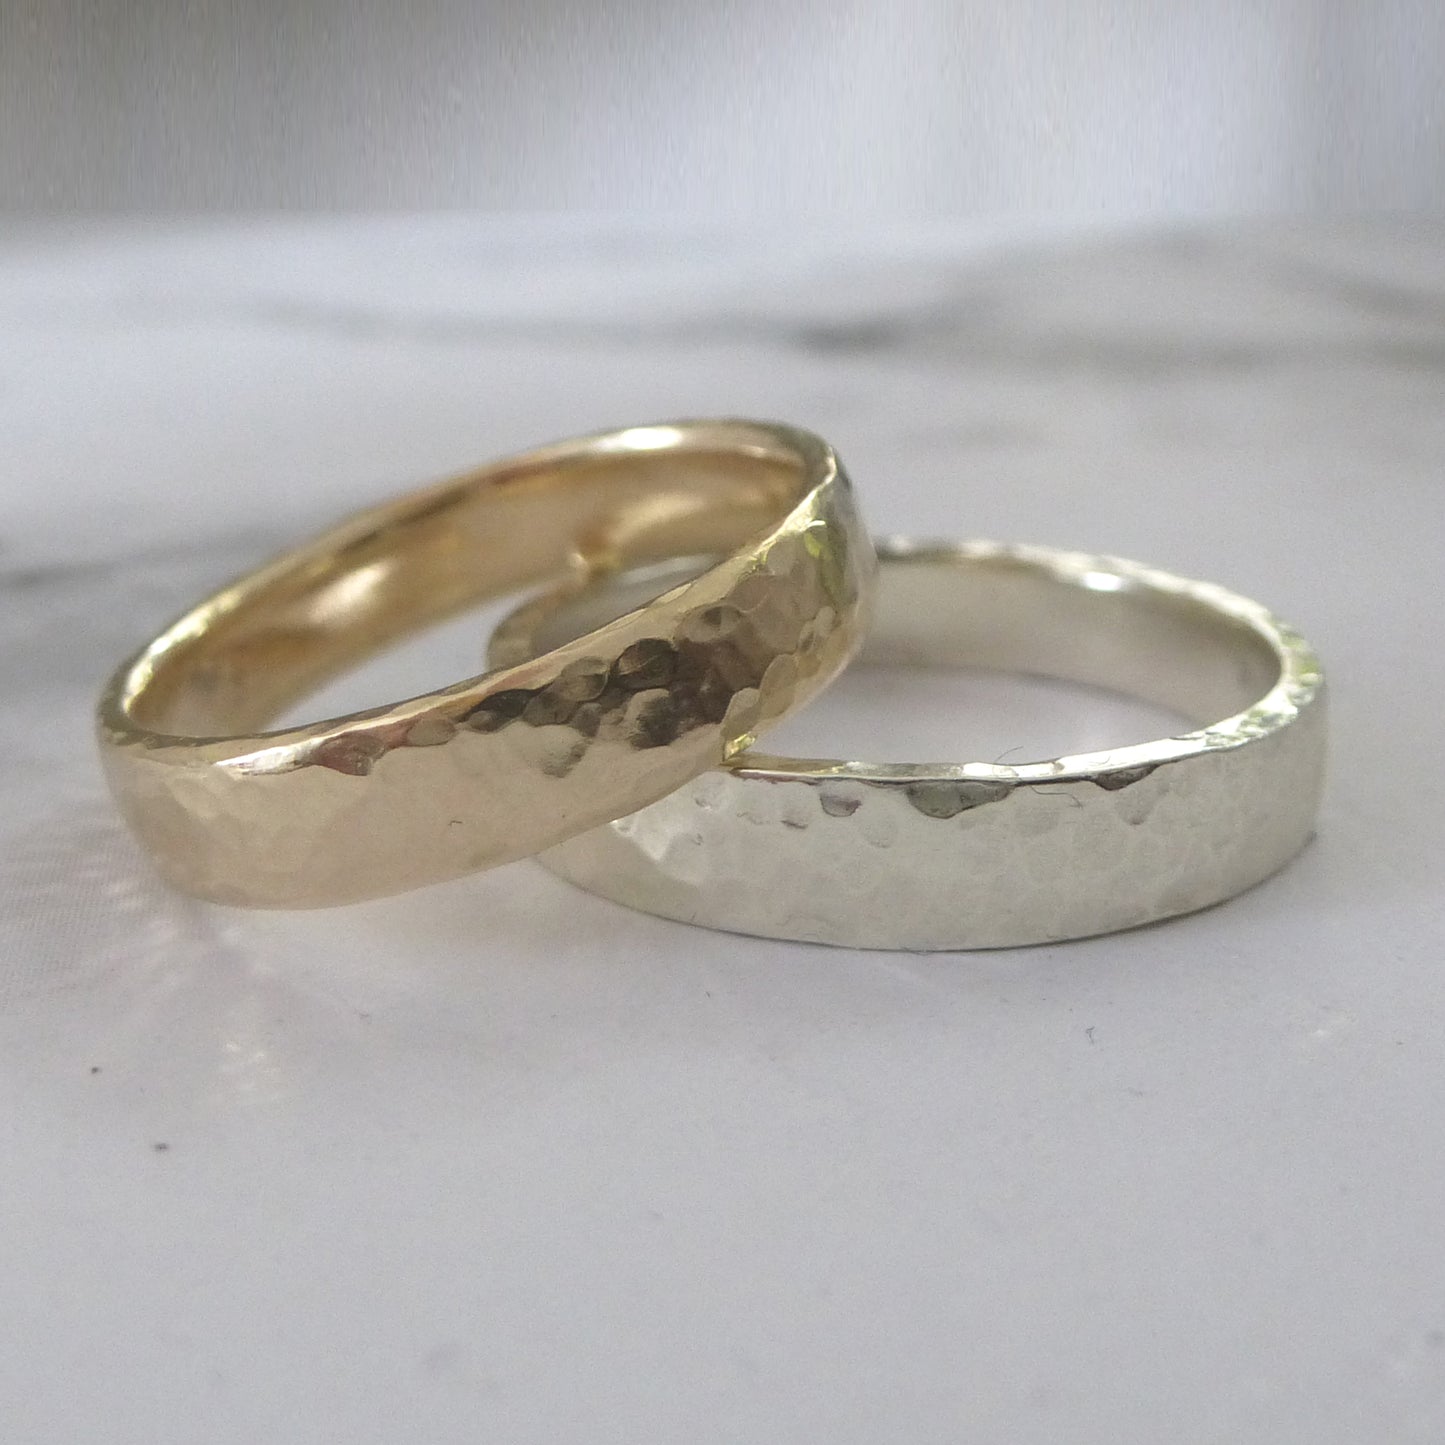 A pair of handmade wedding bands, 9ct recycled gold, upper band 9ct yellow, lower band 9ct white